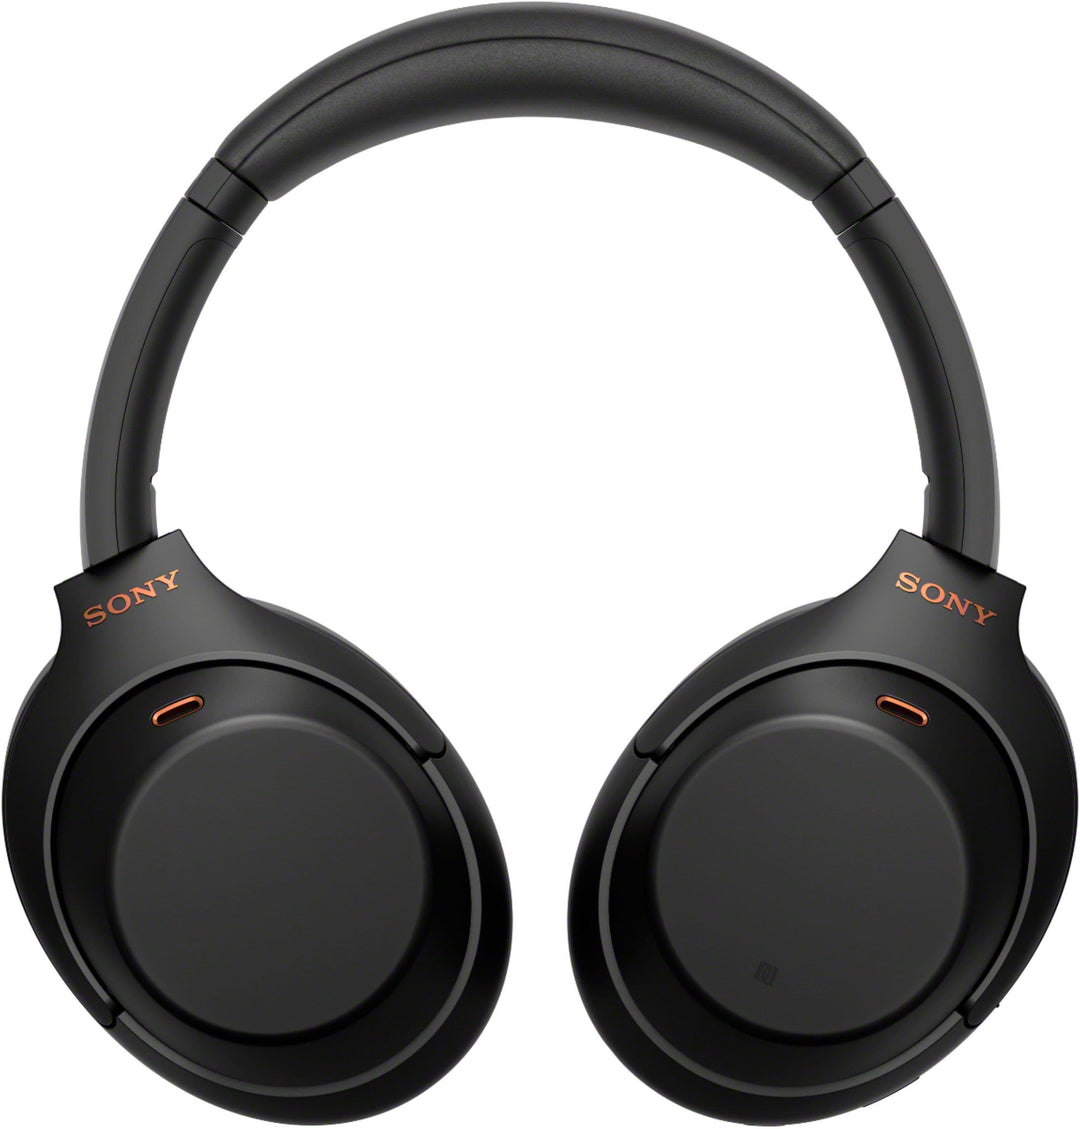 Sony - WH-1000XM4 Wireless Noise-Cancelling Over-the-Ear Headphones - Black_7